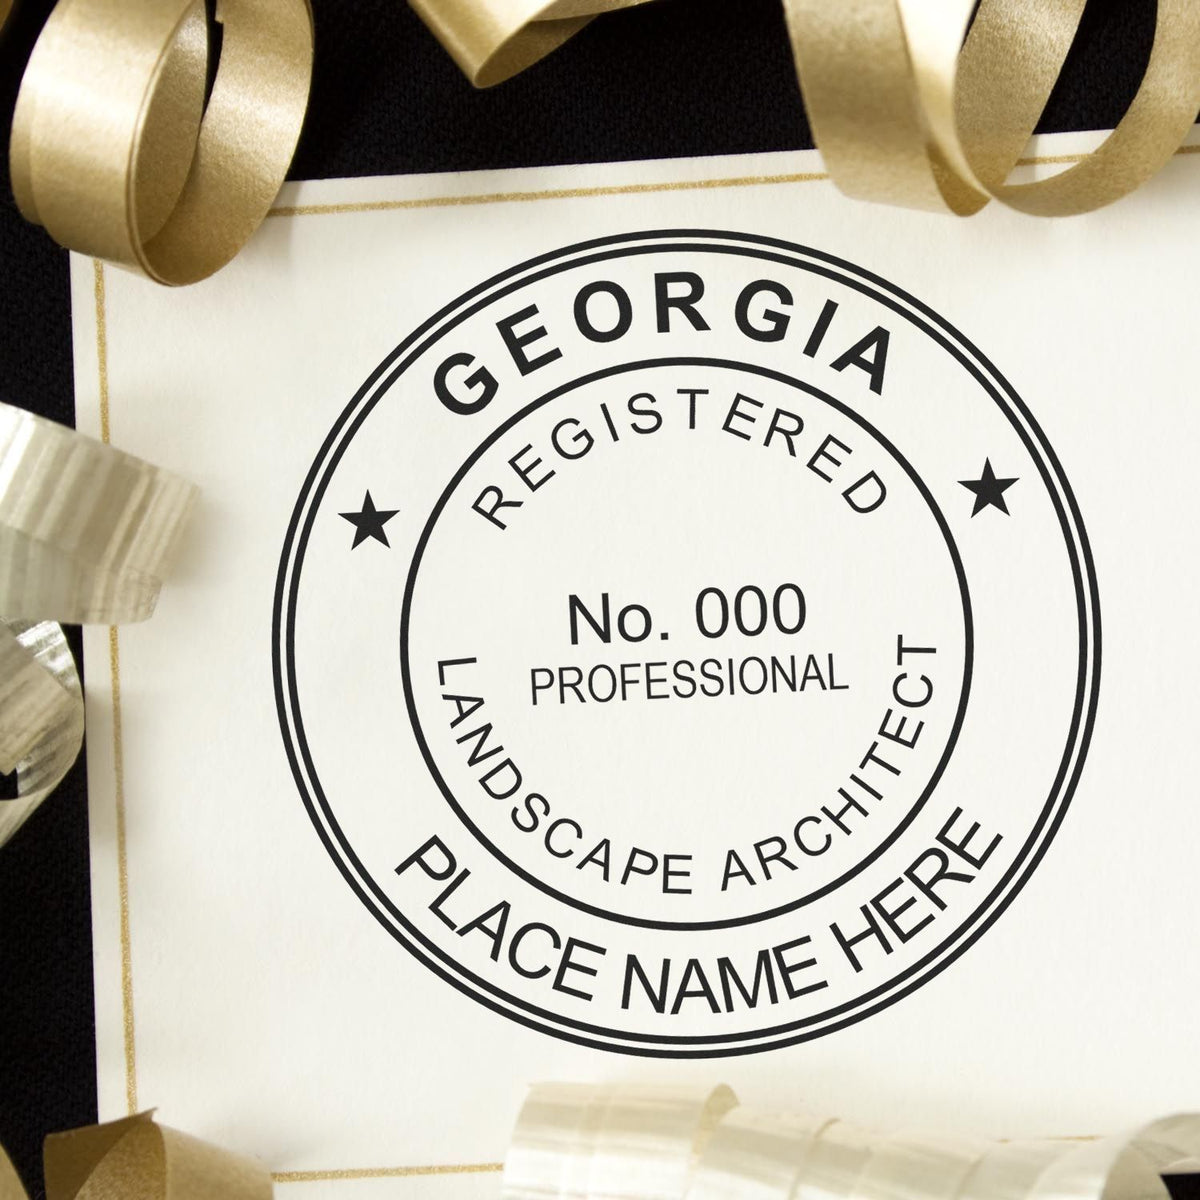 A photograph of the Self-Inking Georgia Landscape Architect Stamp stamp impression reveals a vivid, professional image of the on paper.